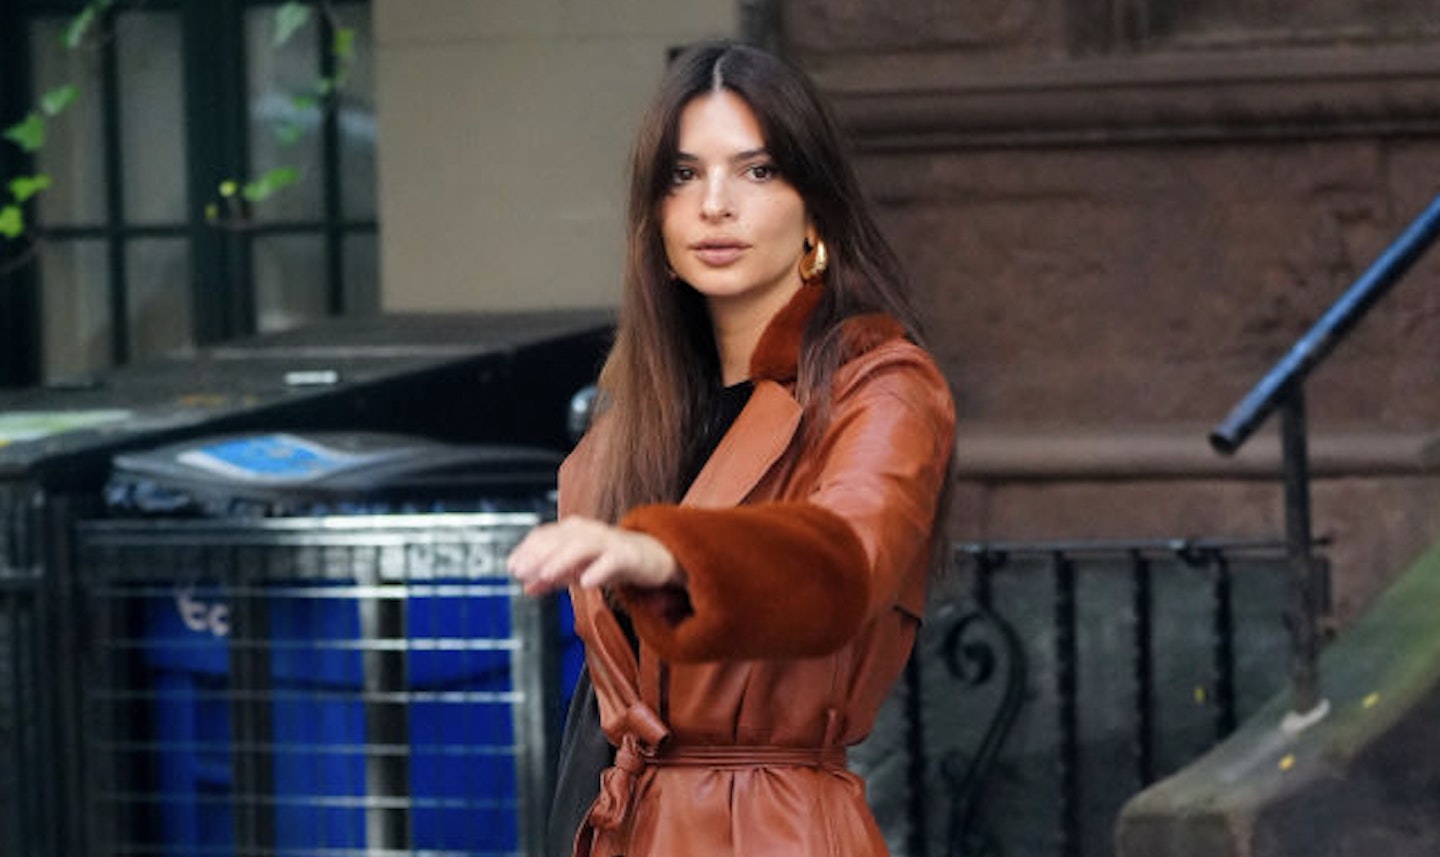 Emily Ratajkowski's Fur-Lined Leather Trench Coat Is the Perfect